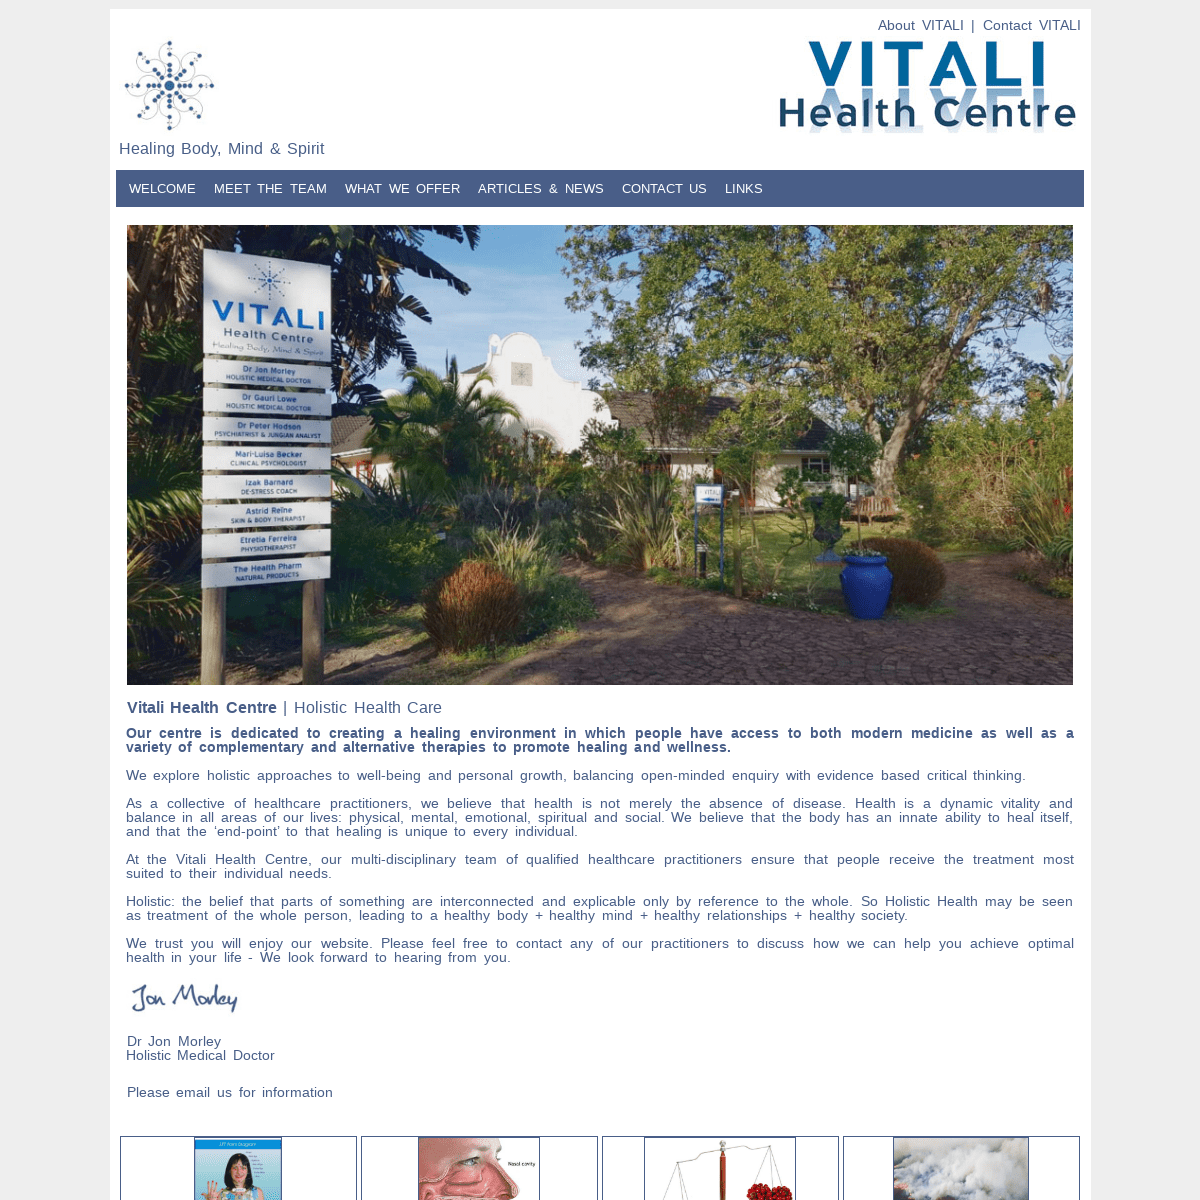 VITALI Health Centre - Dr Jon Morley and the team of Holistic Health care practitioners